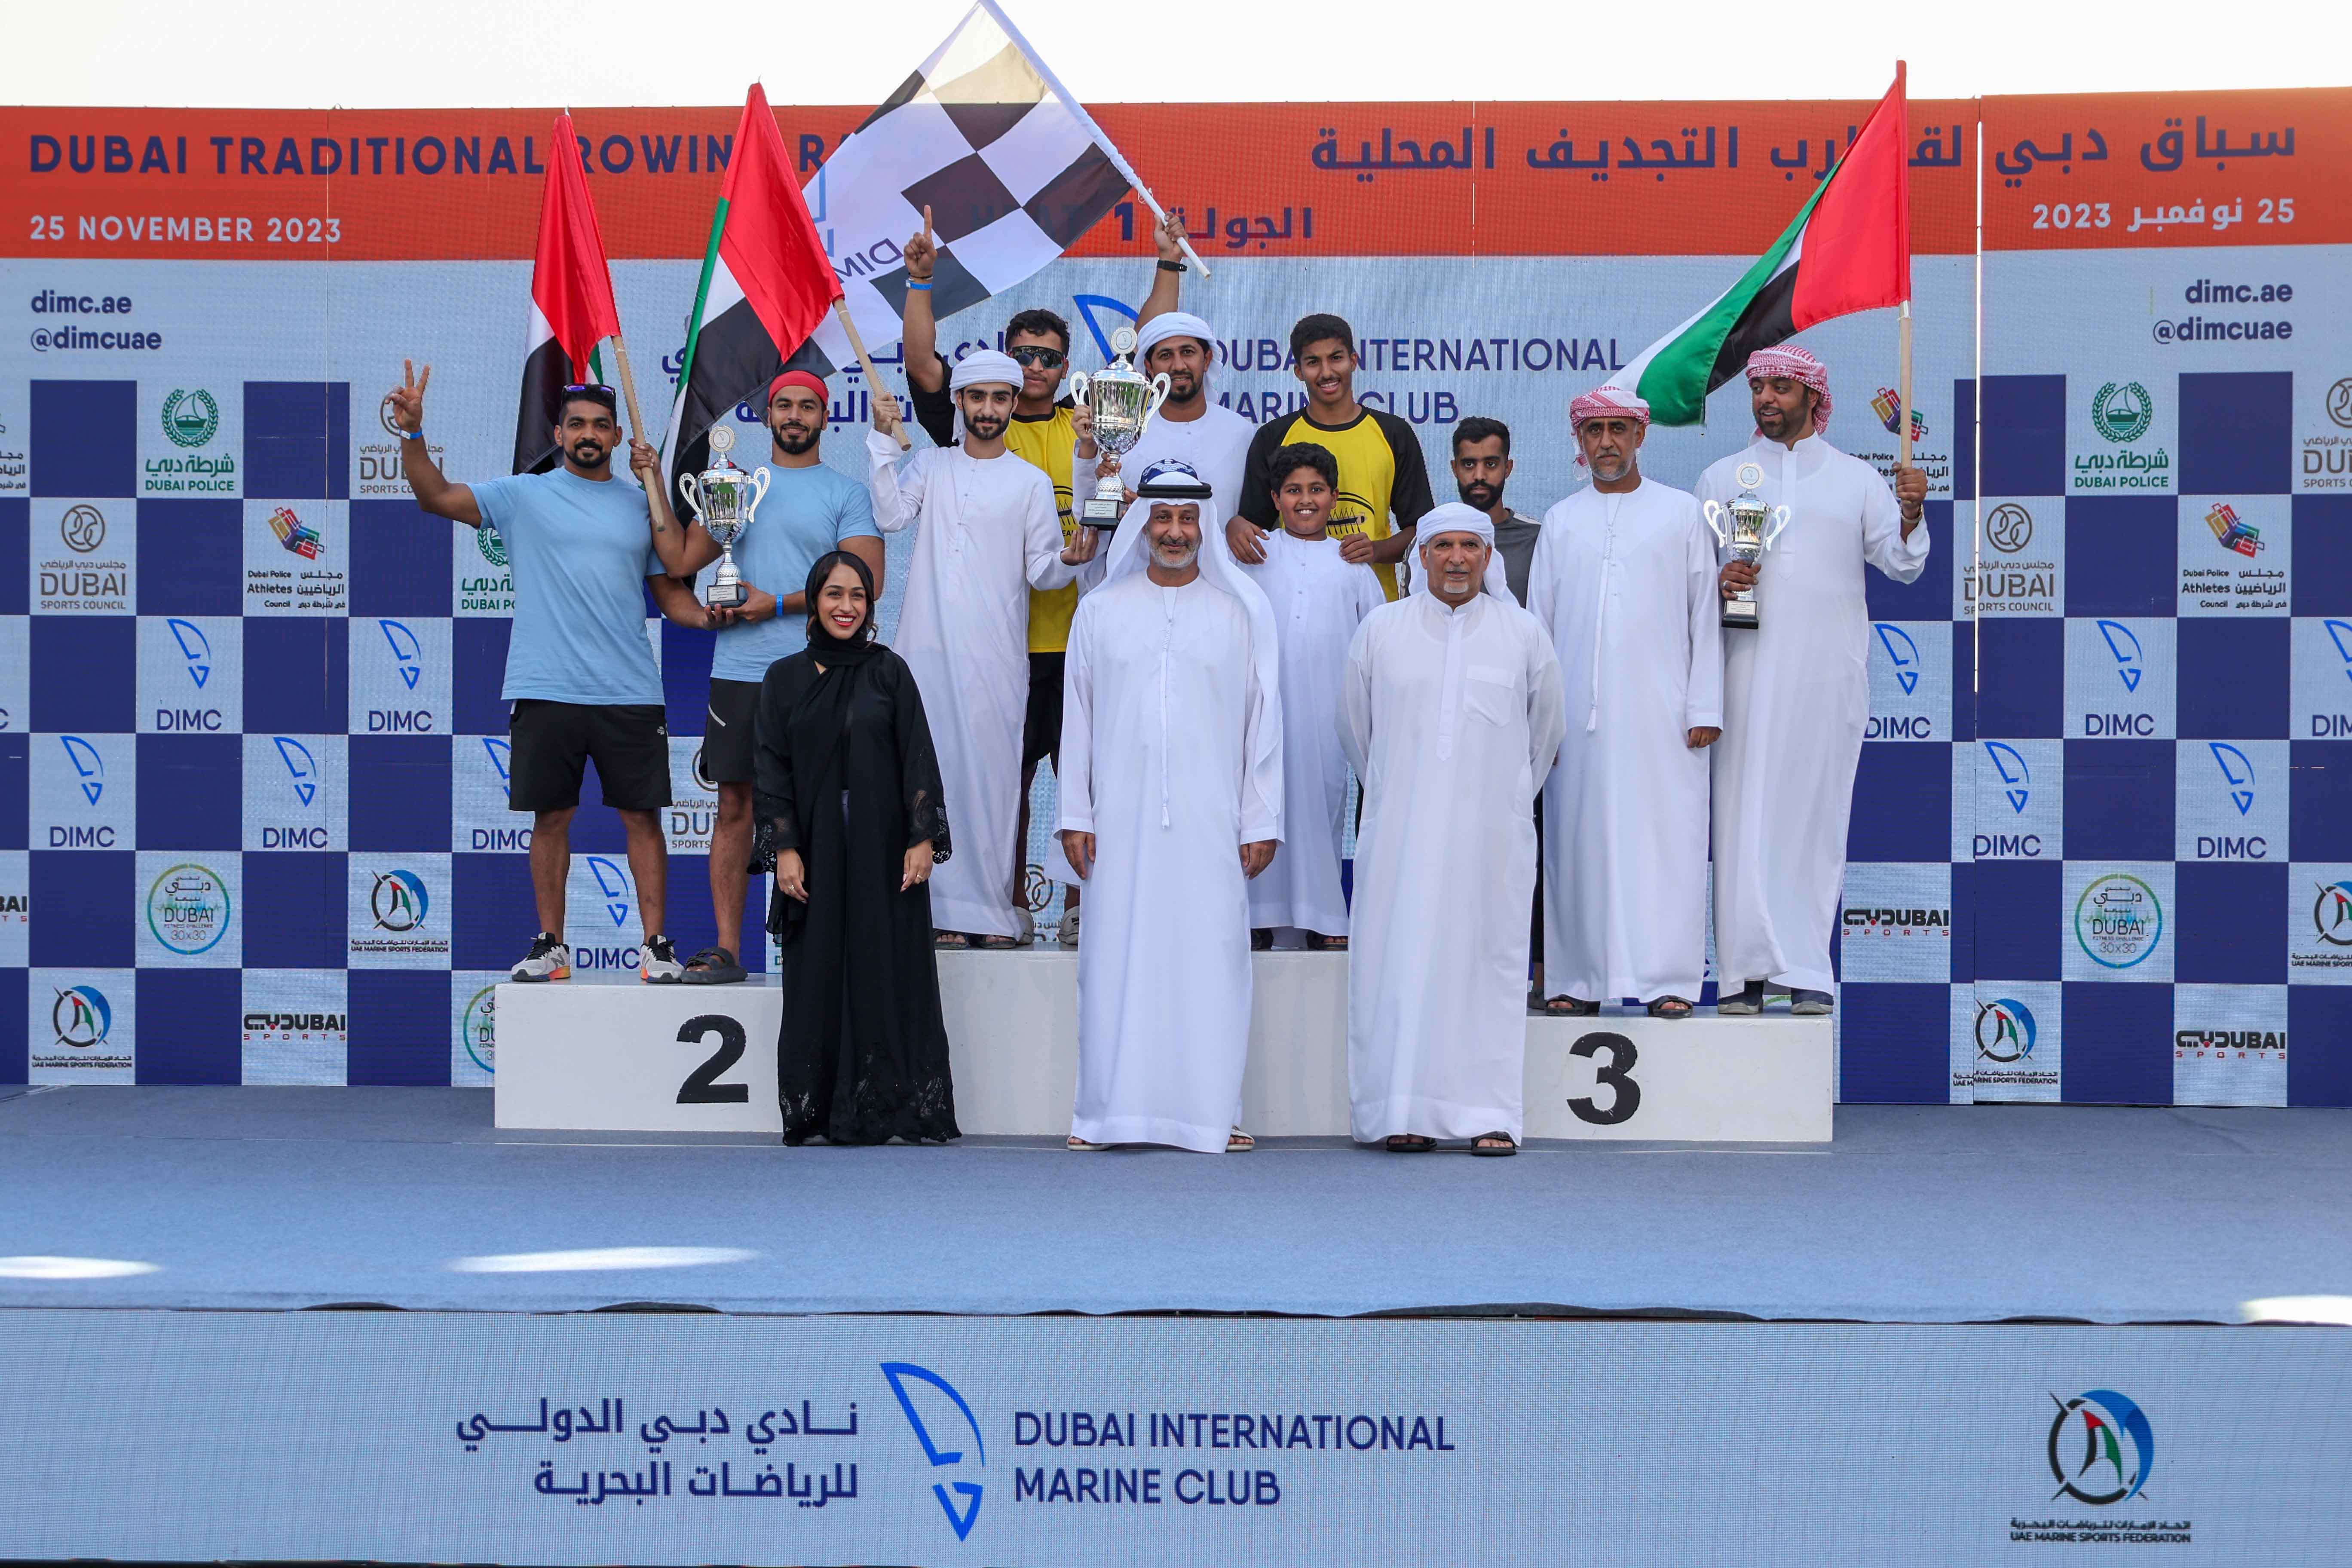 Zilzal and KHK: Champions of the First Round in Dubai Traditional Rowing Race